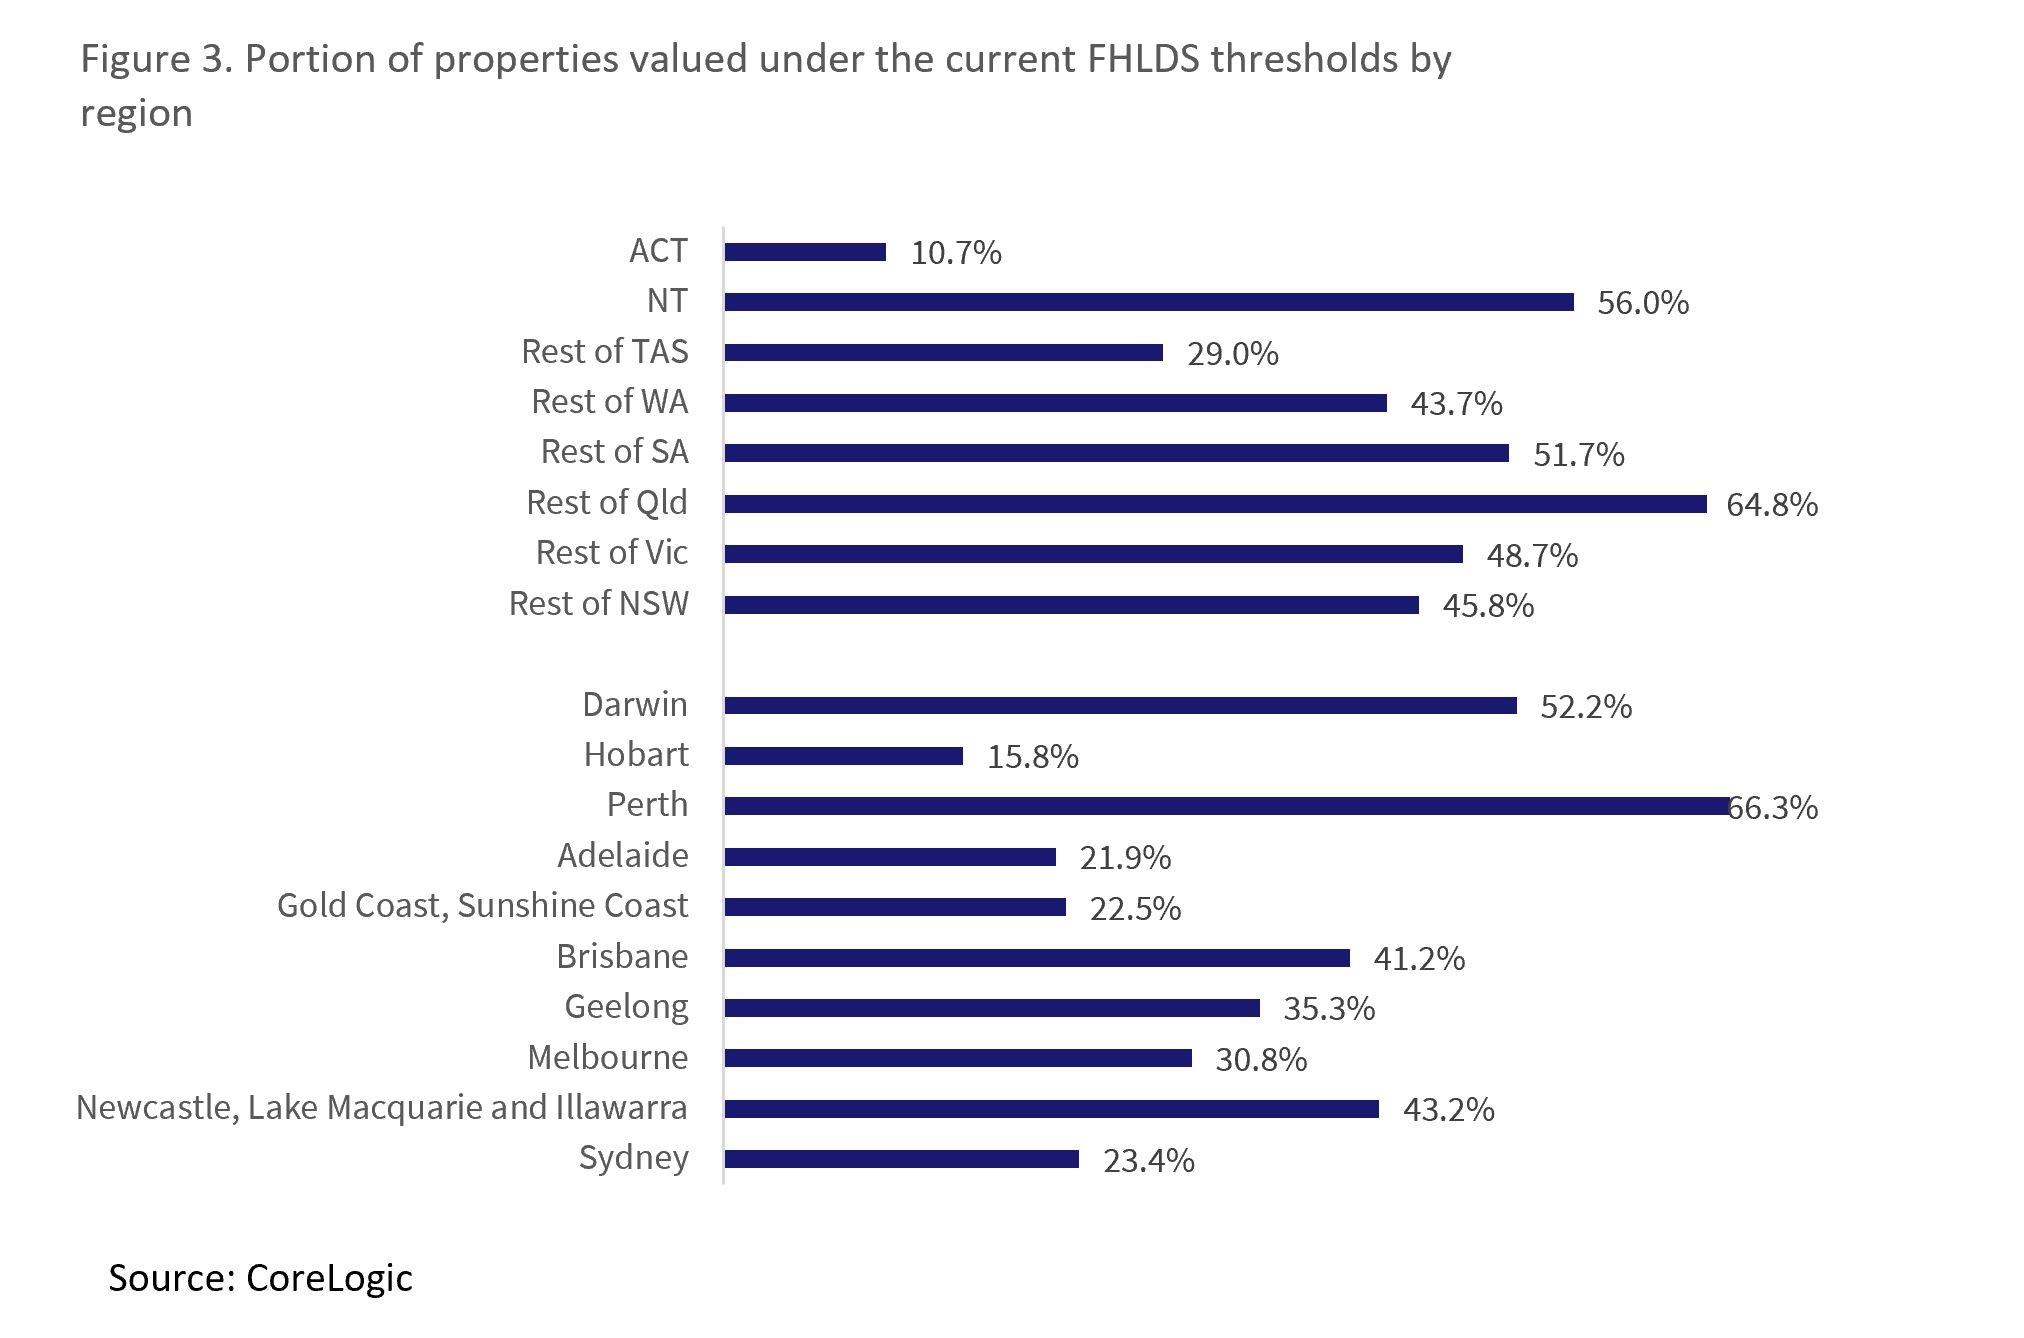 Portion of properties valued under the current FHLDS thresholds by region